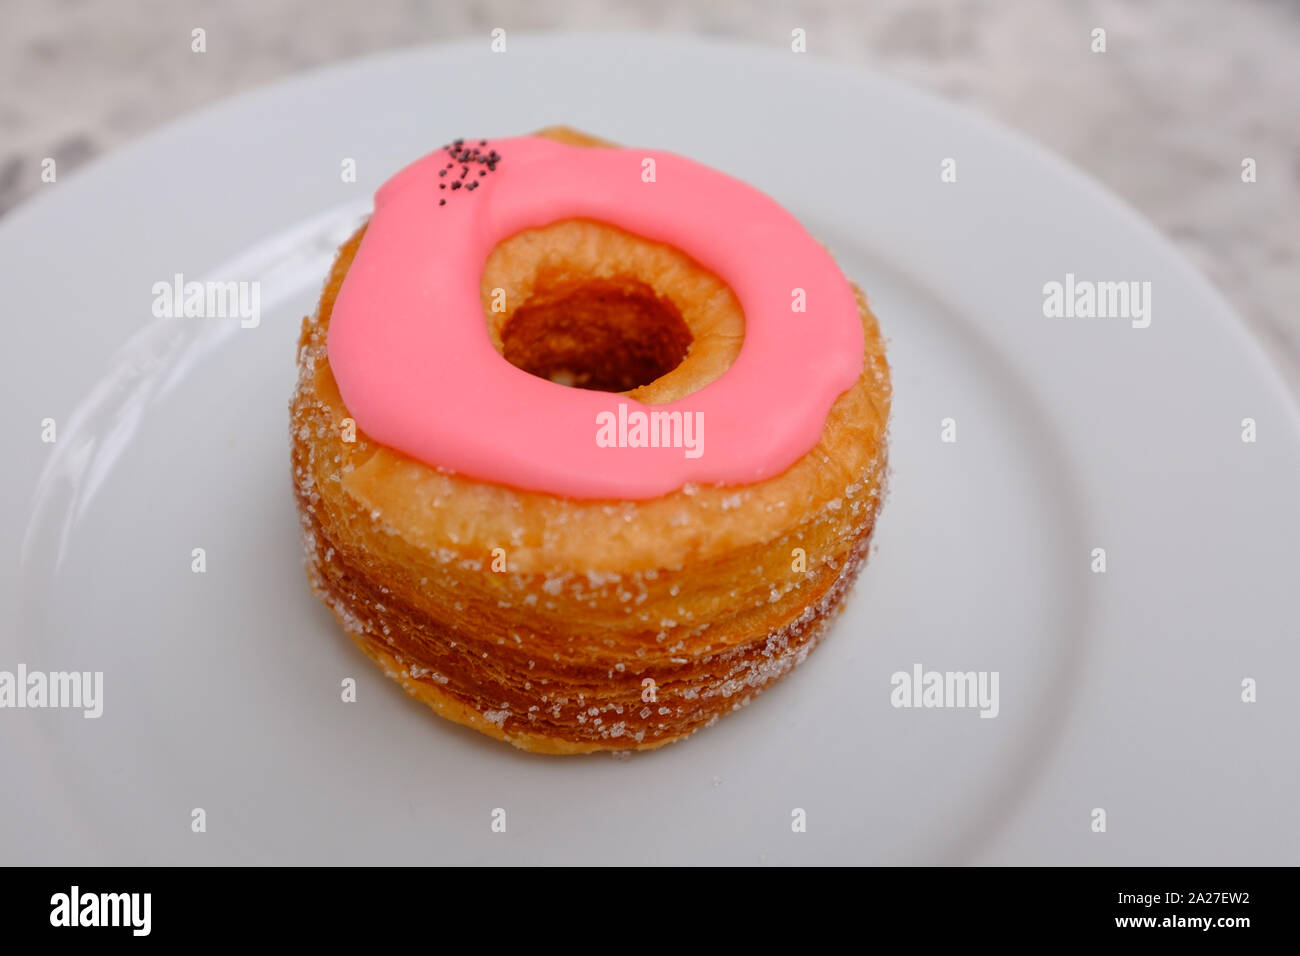 A single pink glazed cronut pastry on a plate at Dominique Ansel Baker, London, England Stock Photo